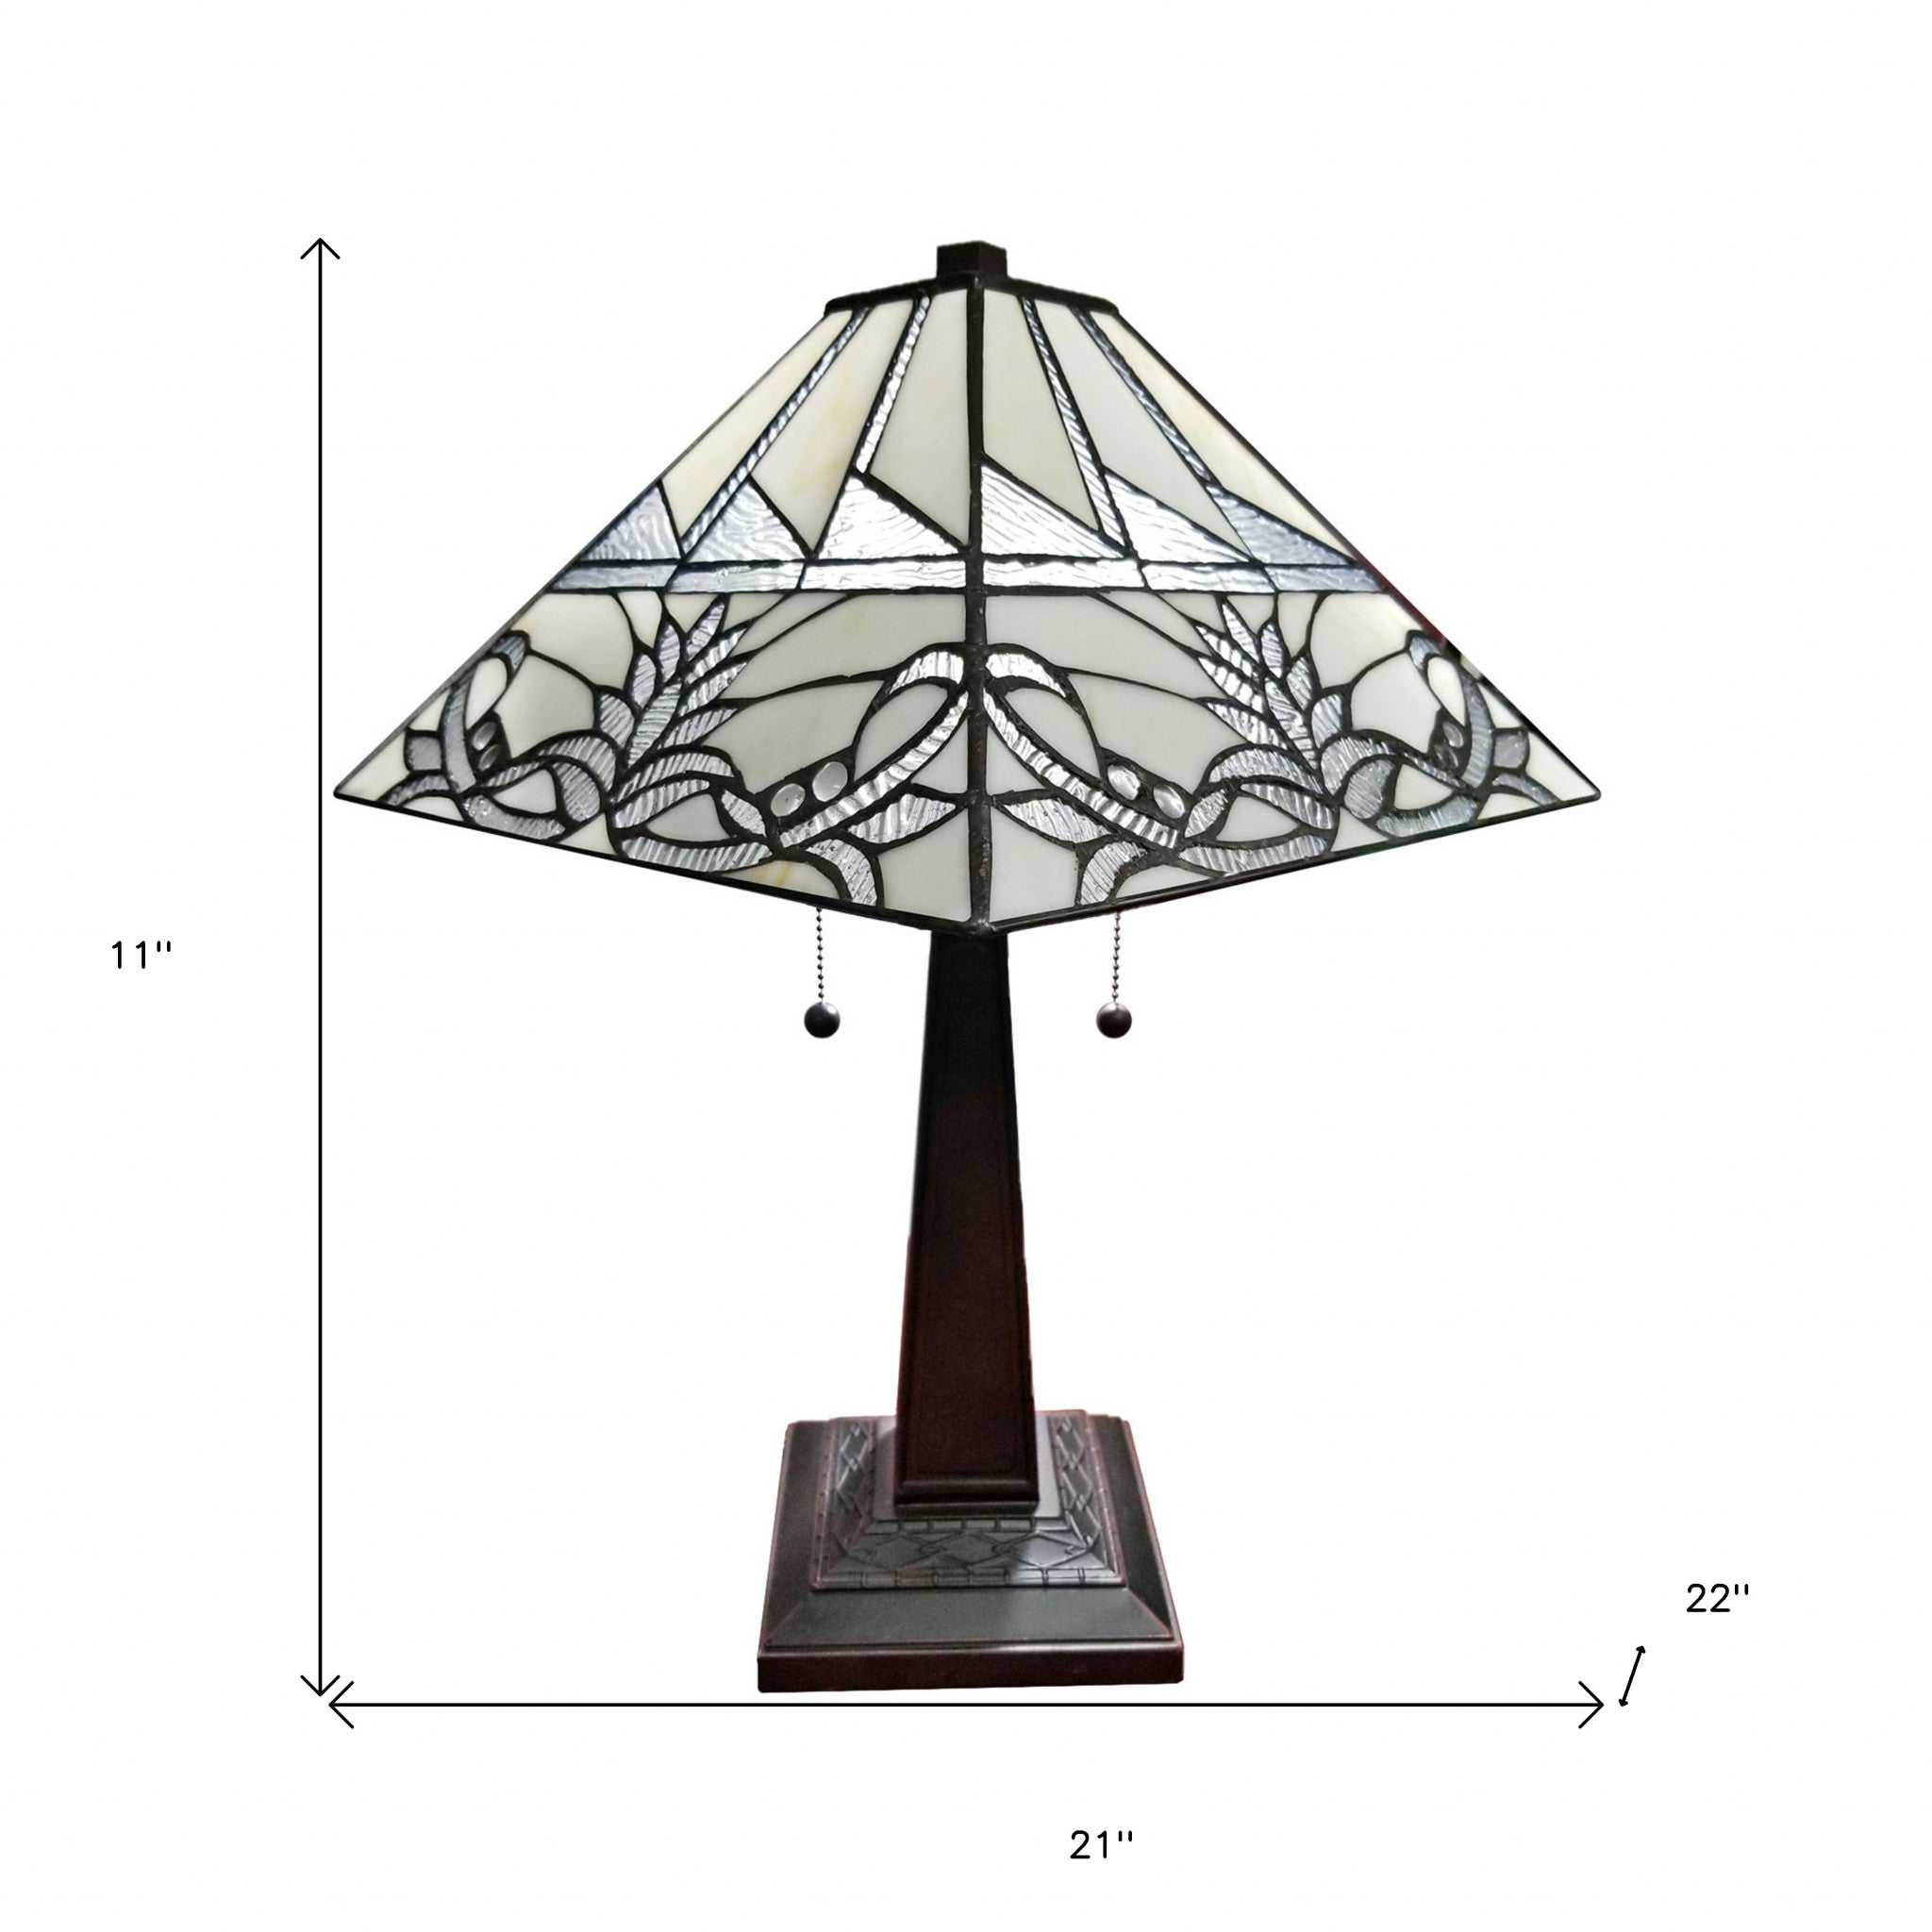 22" Dark Brown Metal Two Light Candlestick Table Lamp With White Empire Shade